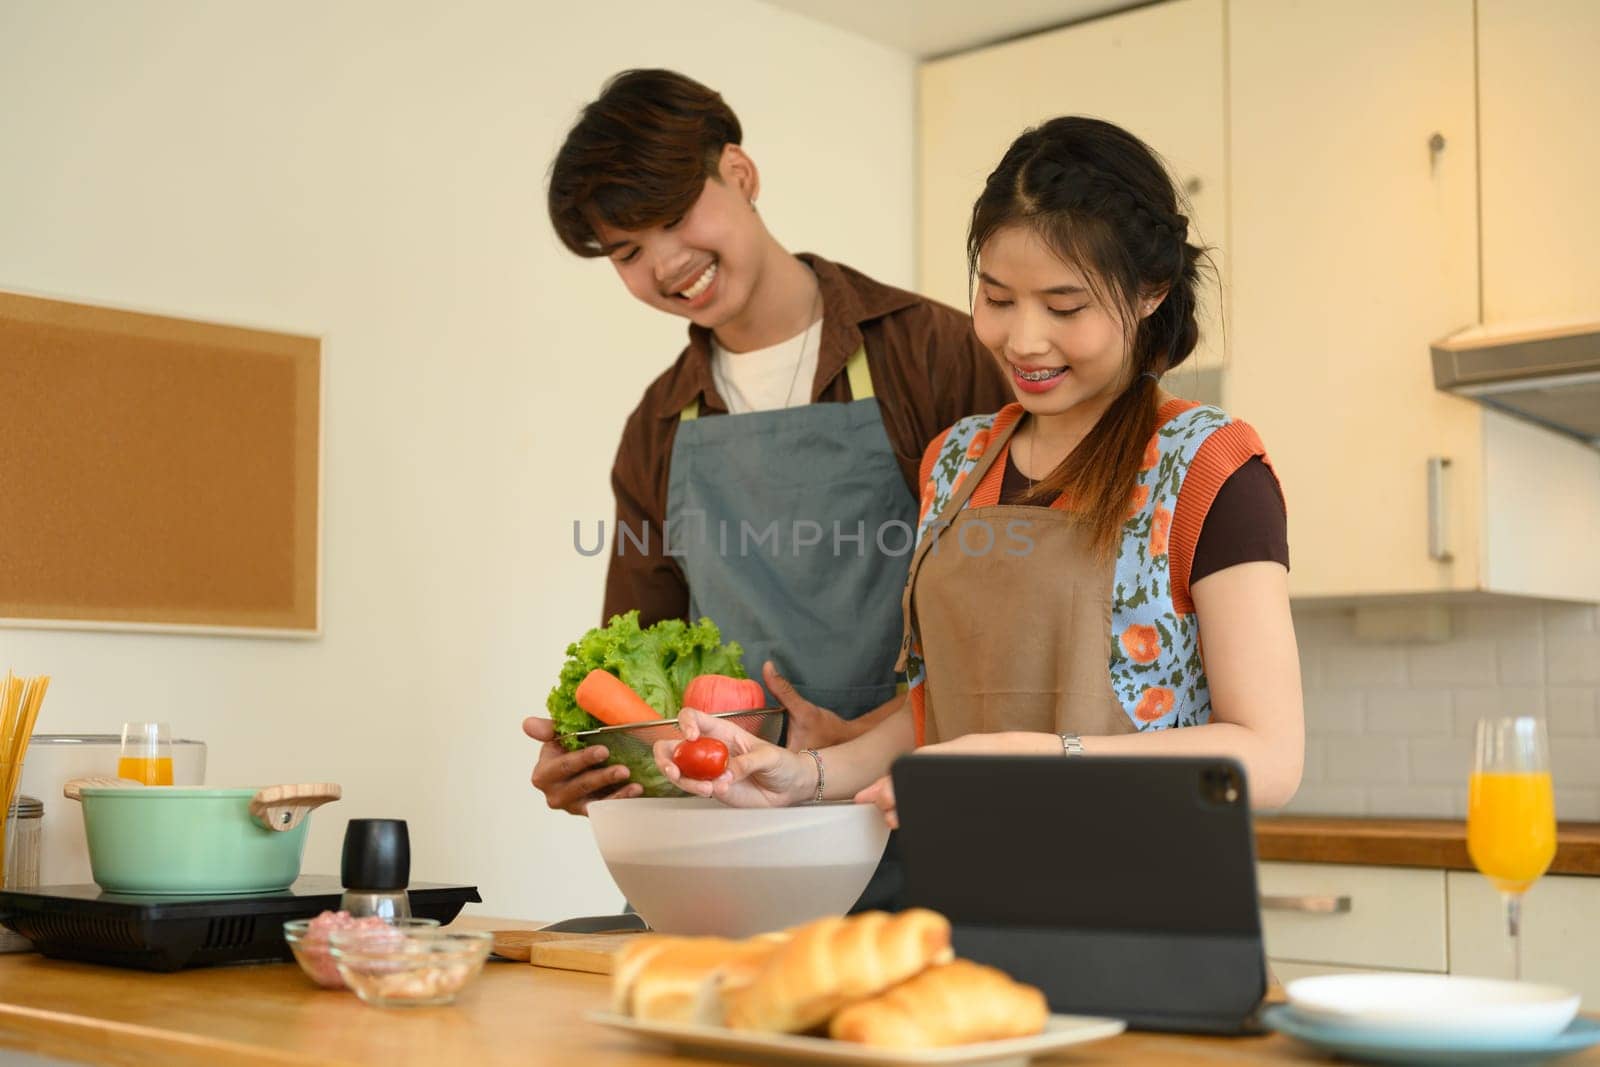 Young couple reading recipe from internet on digital tablet while cooking healthy food together in kitchen by prathanchorruangsak